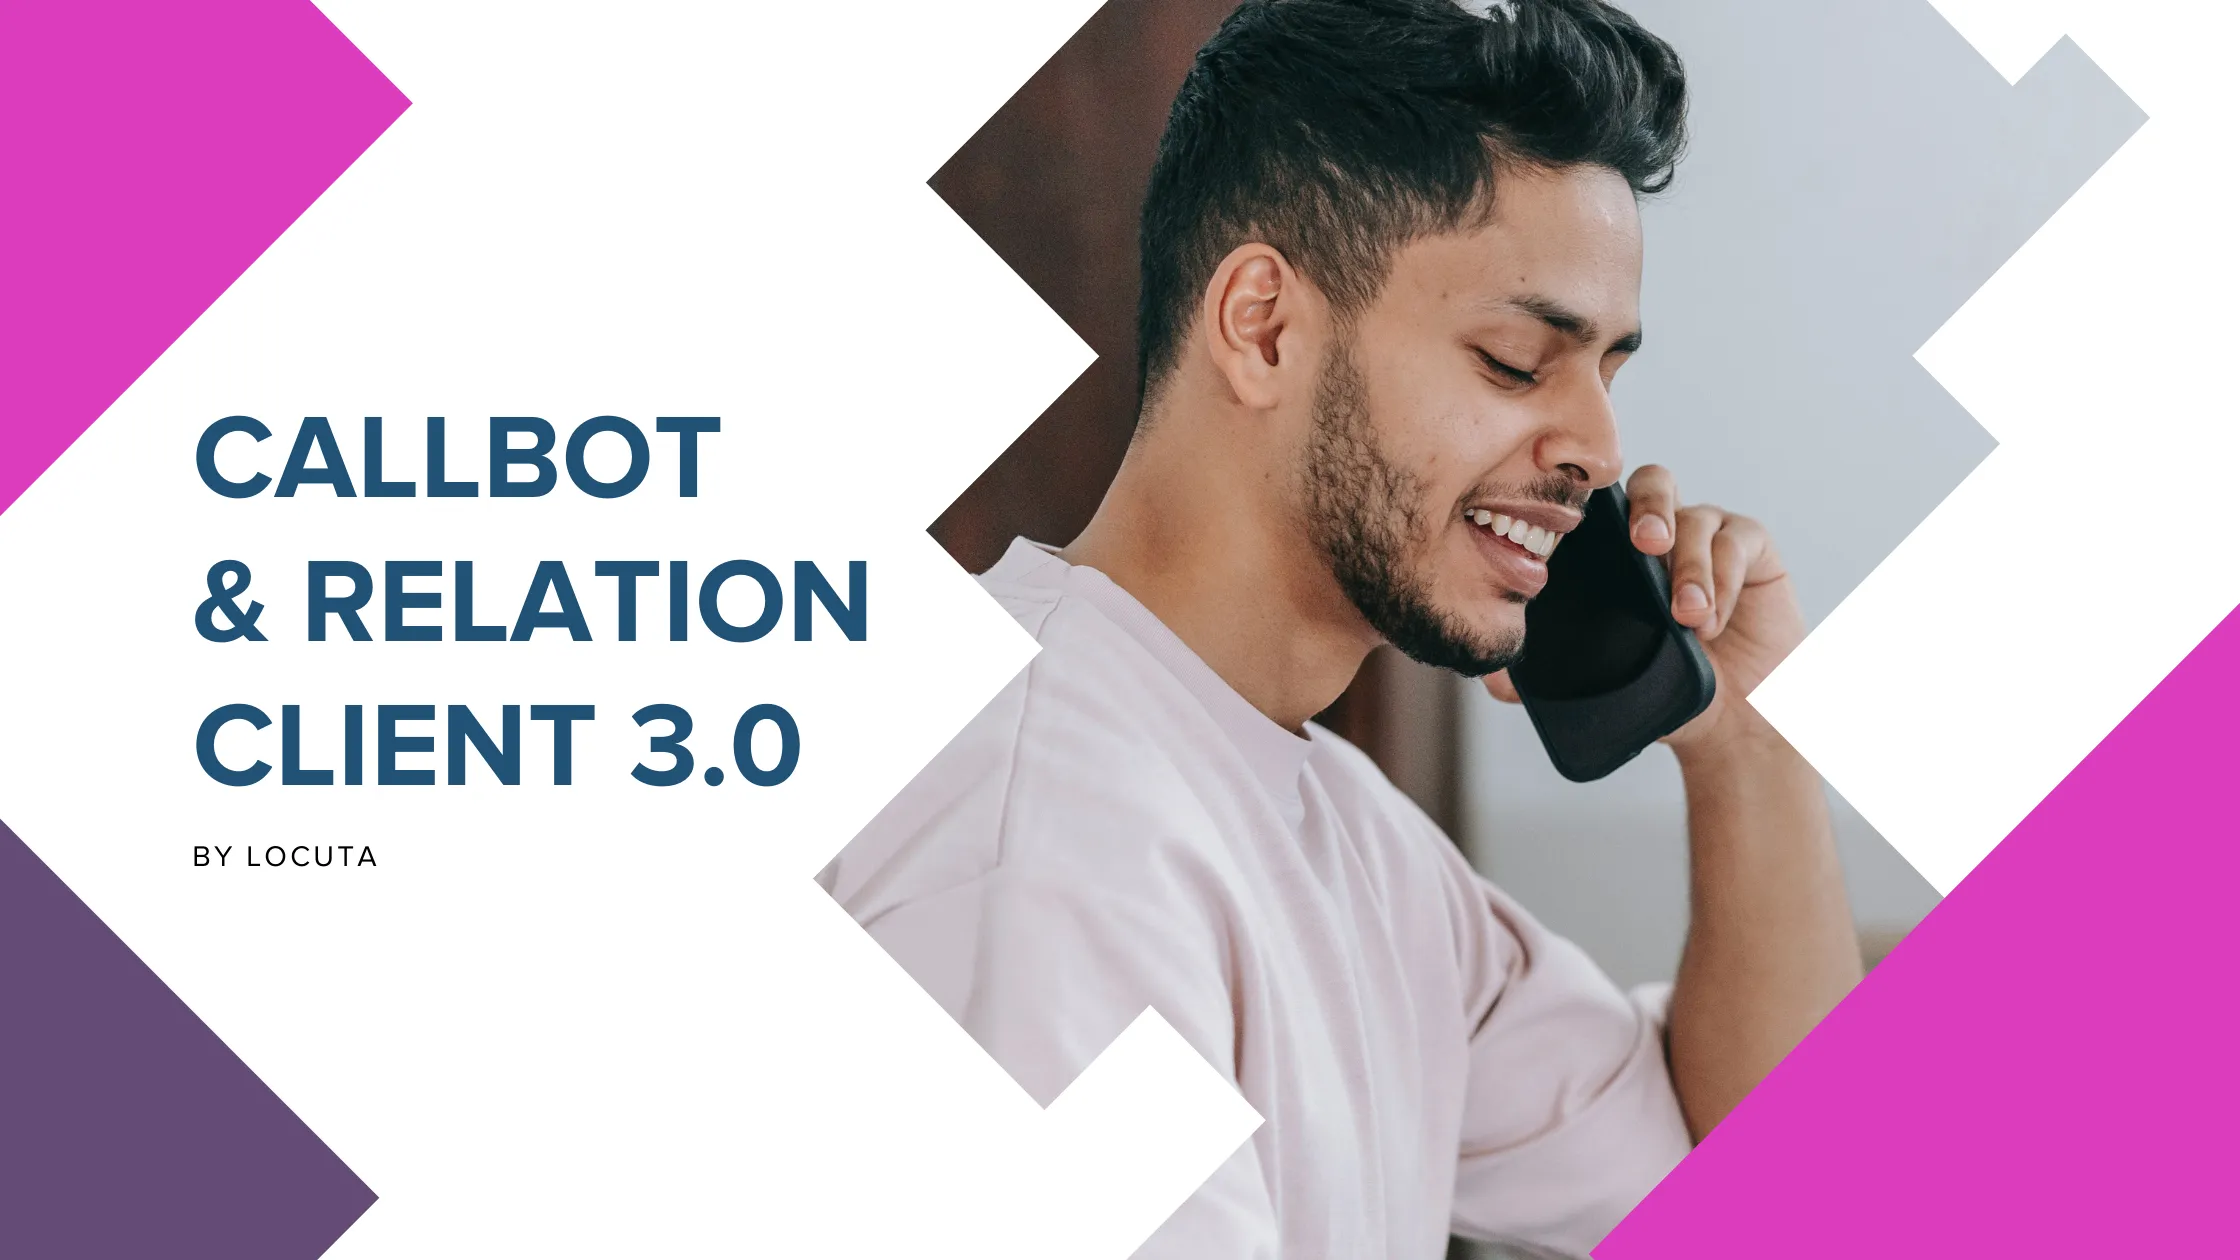 A man wants to install a callbot to be in the future of customer relationship 3.0